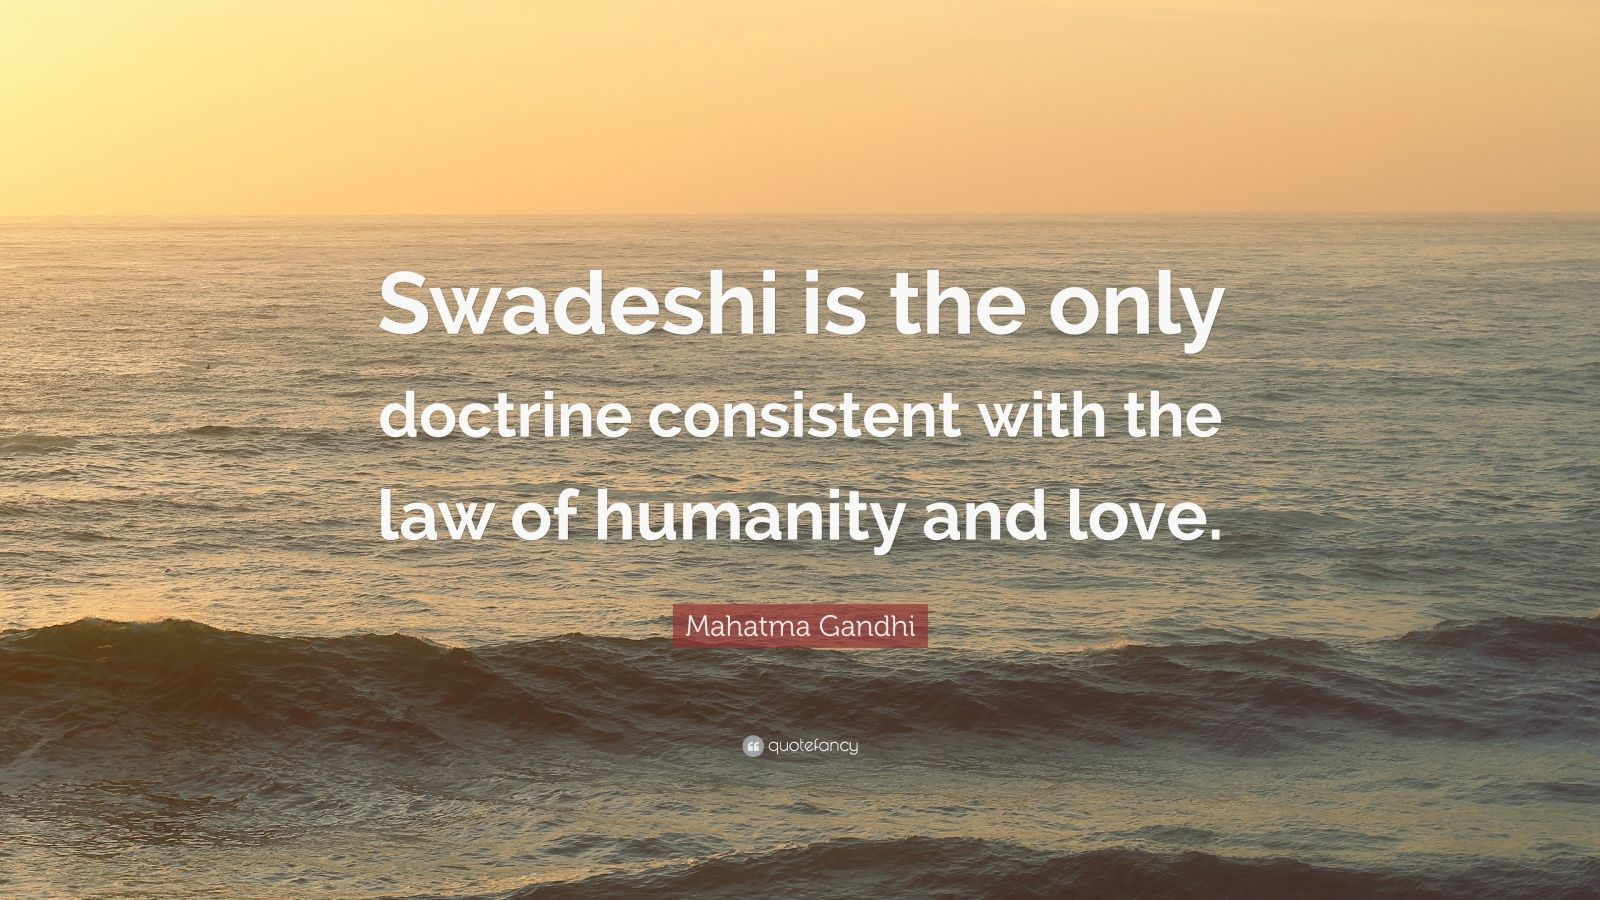 Mahatma Gandhi Quote Swadeshi Is The Only Doctrine Consistent With The Law Of Humanity And -3889